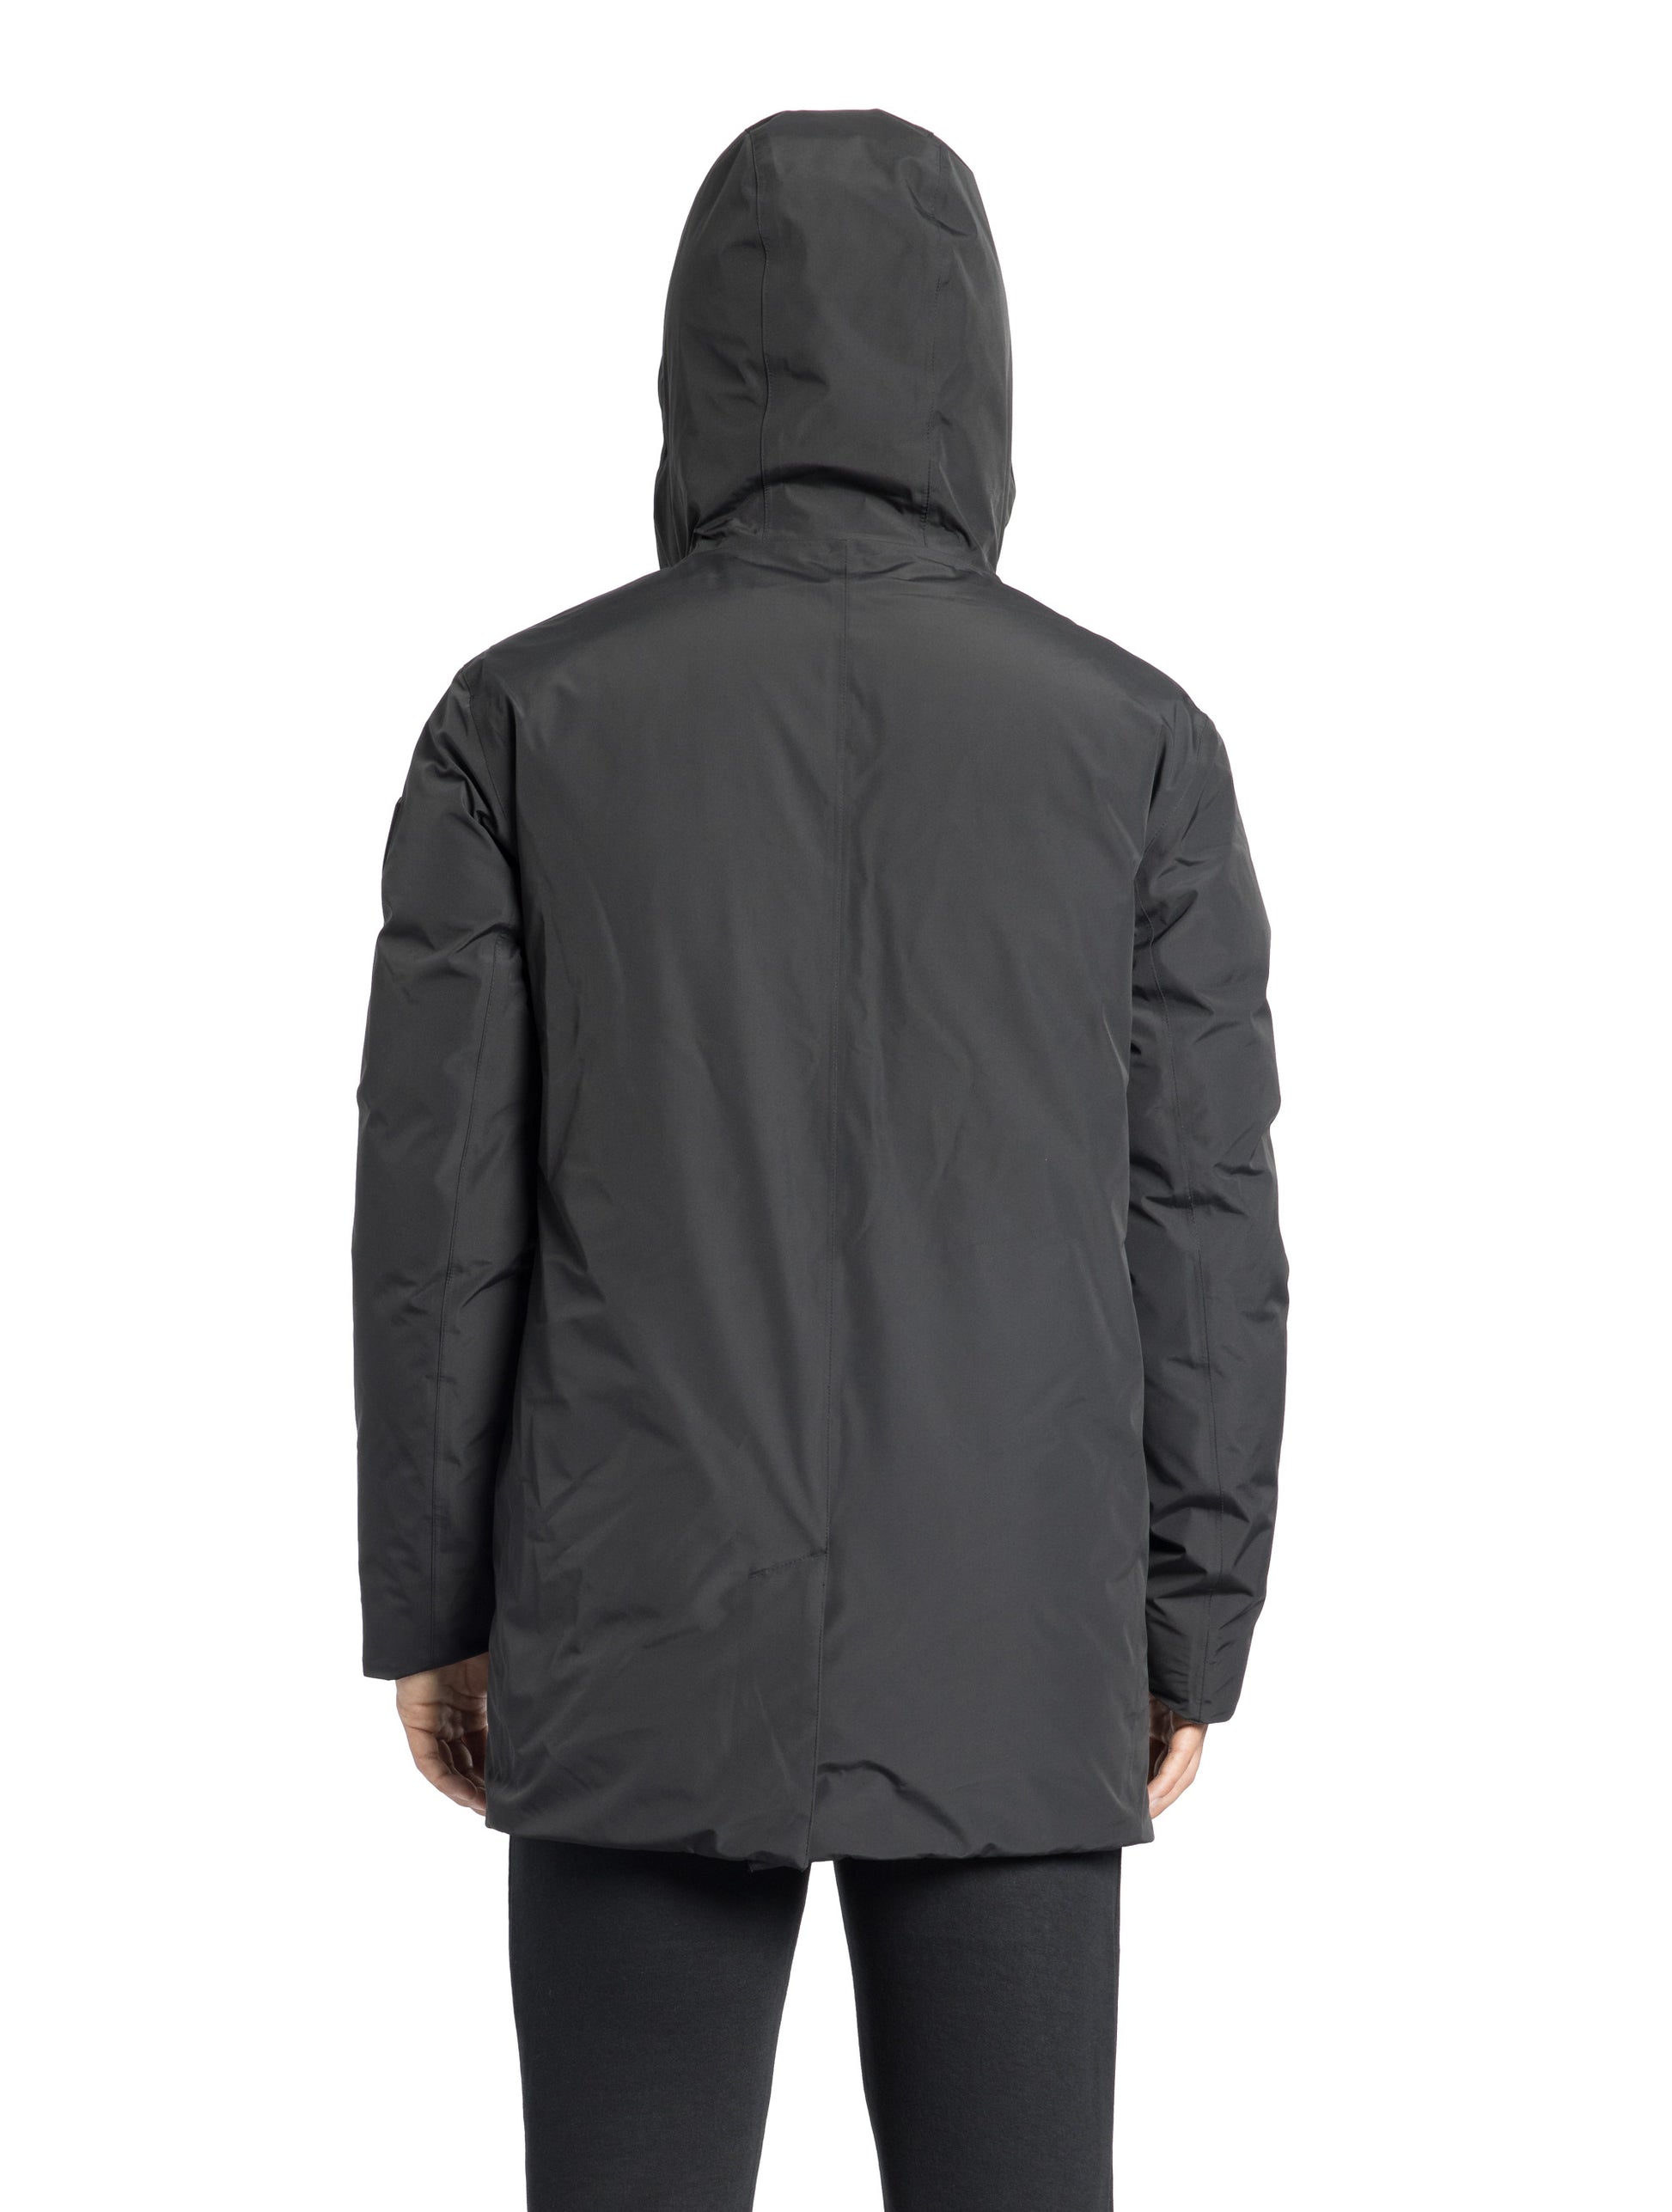 Kason Men's Light Down Parka in thigh length, premium 3-ply micro denier and stretch ripstop fabrication, Premium Canadian origin White Duck Down insulation, non-removable down-filled hood, two-way centre-front zipper, magnetic closure wind flap, fleece-lined pockets at chest and waist, flap pockets at waist, pit zipper vents, in Black